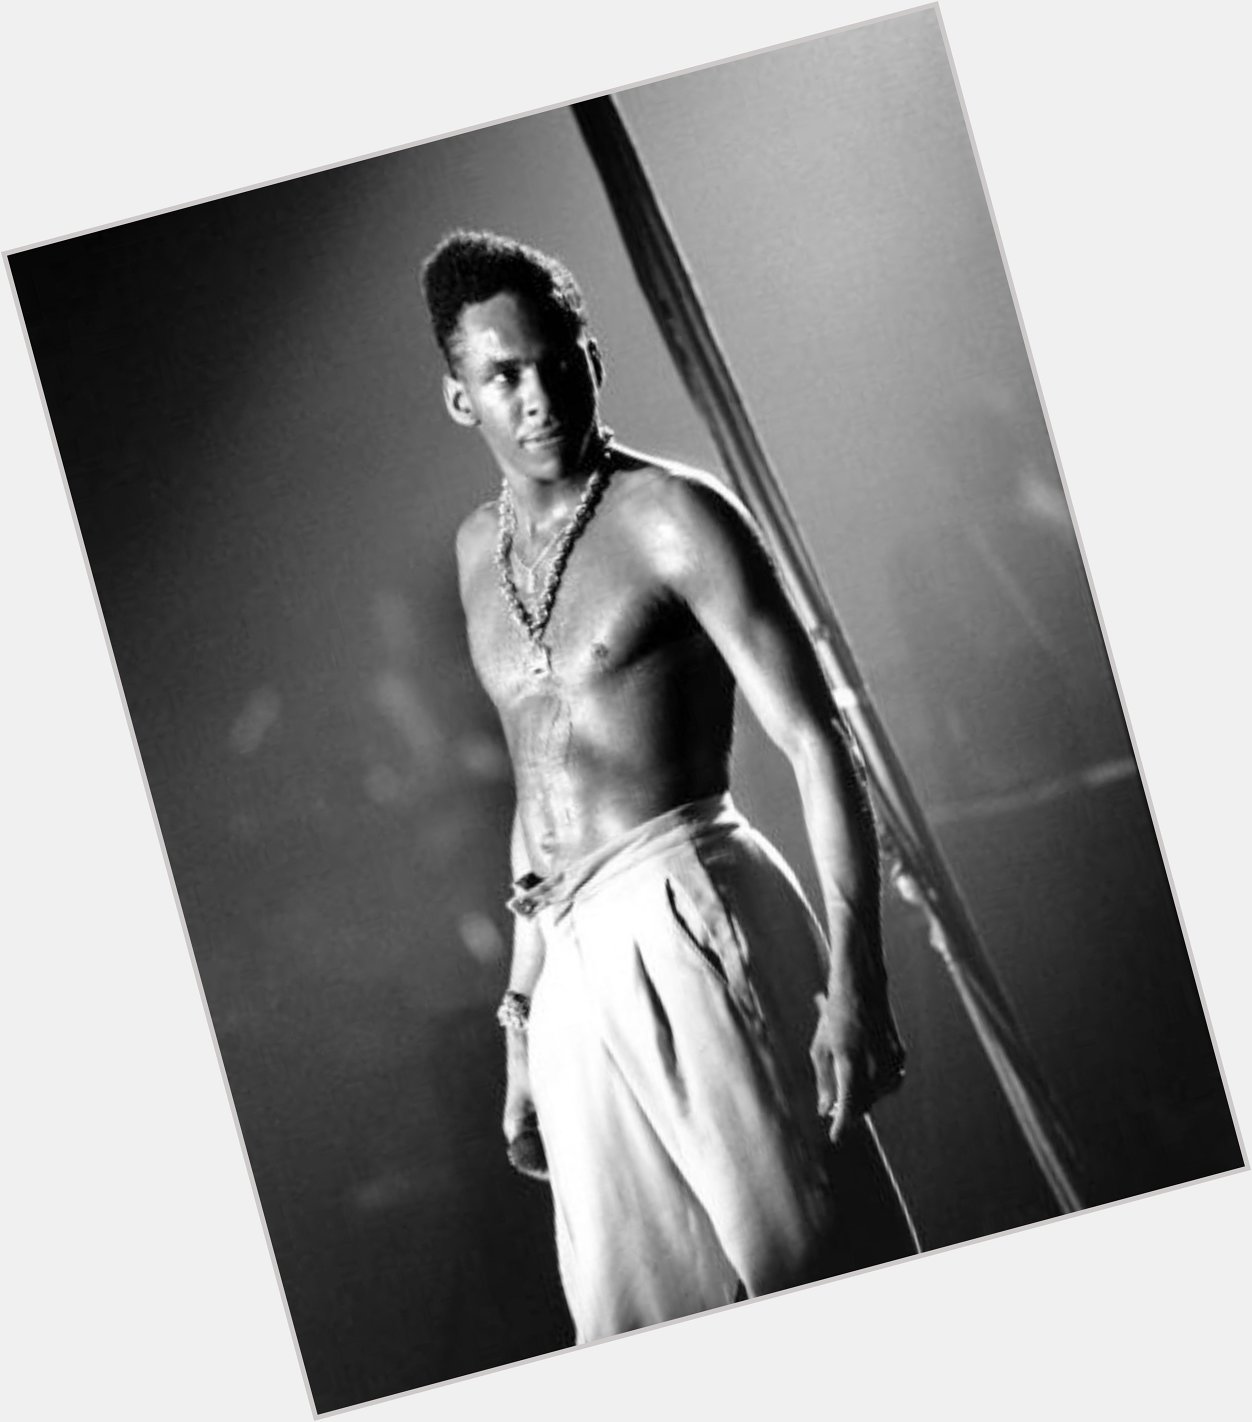 Happy Birthday to one of my first celebrity crushes, Mr. Bobby Brown - King of R&B. 